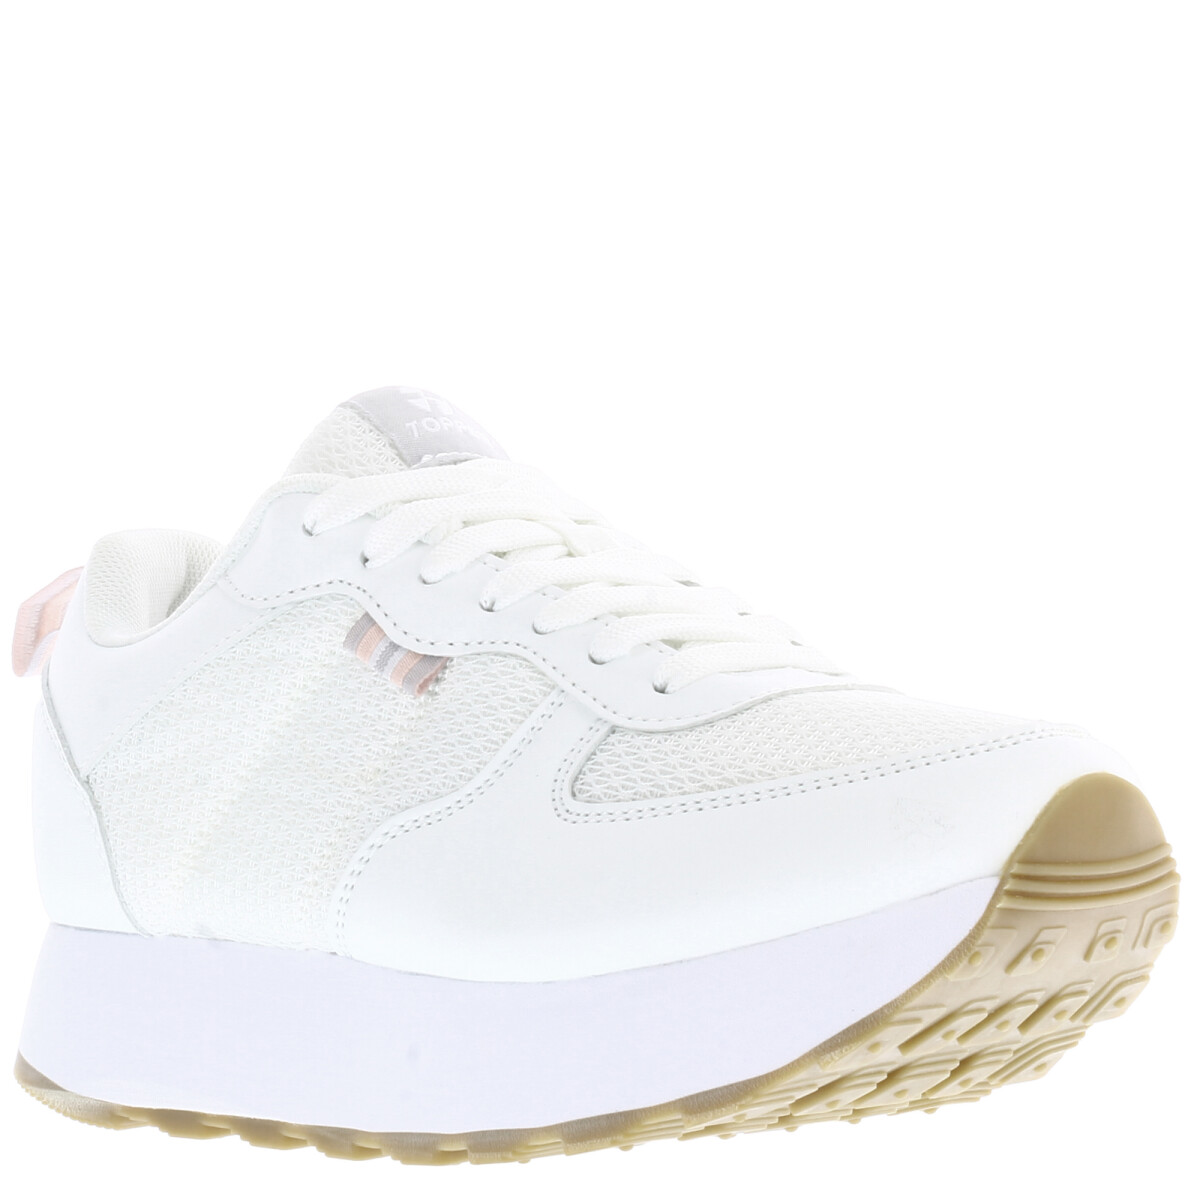 T.350 Wedge Topper - Blanco/Gris/Rosa 